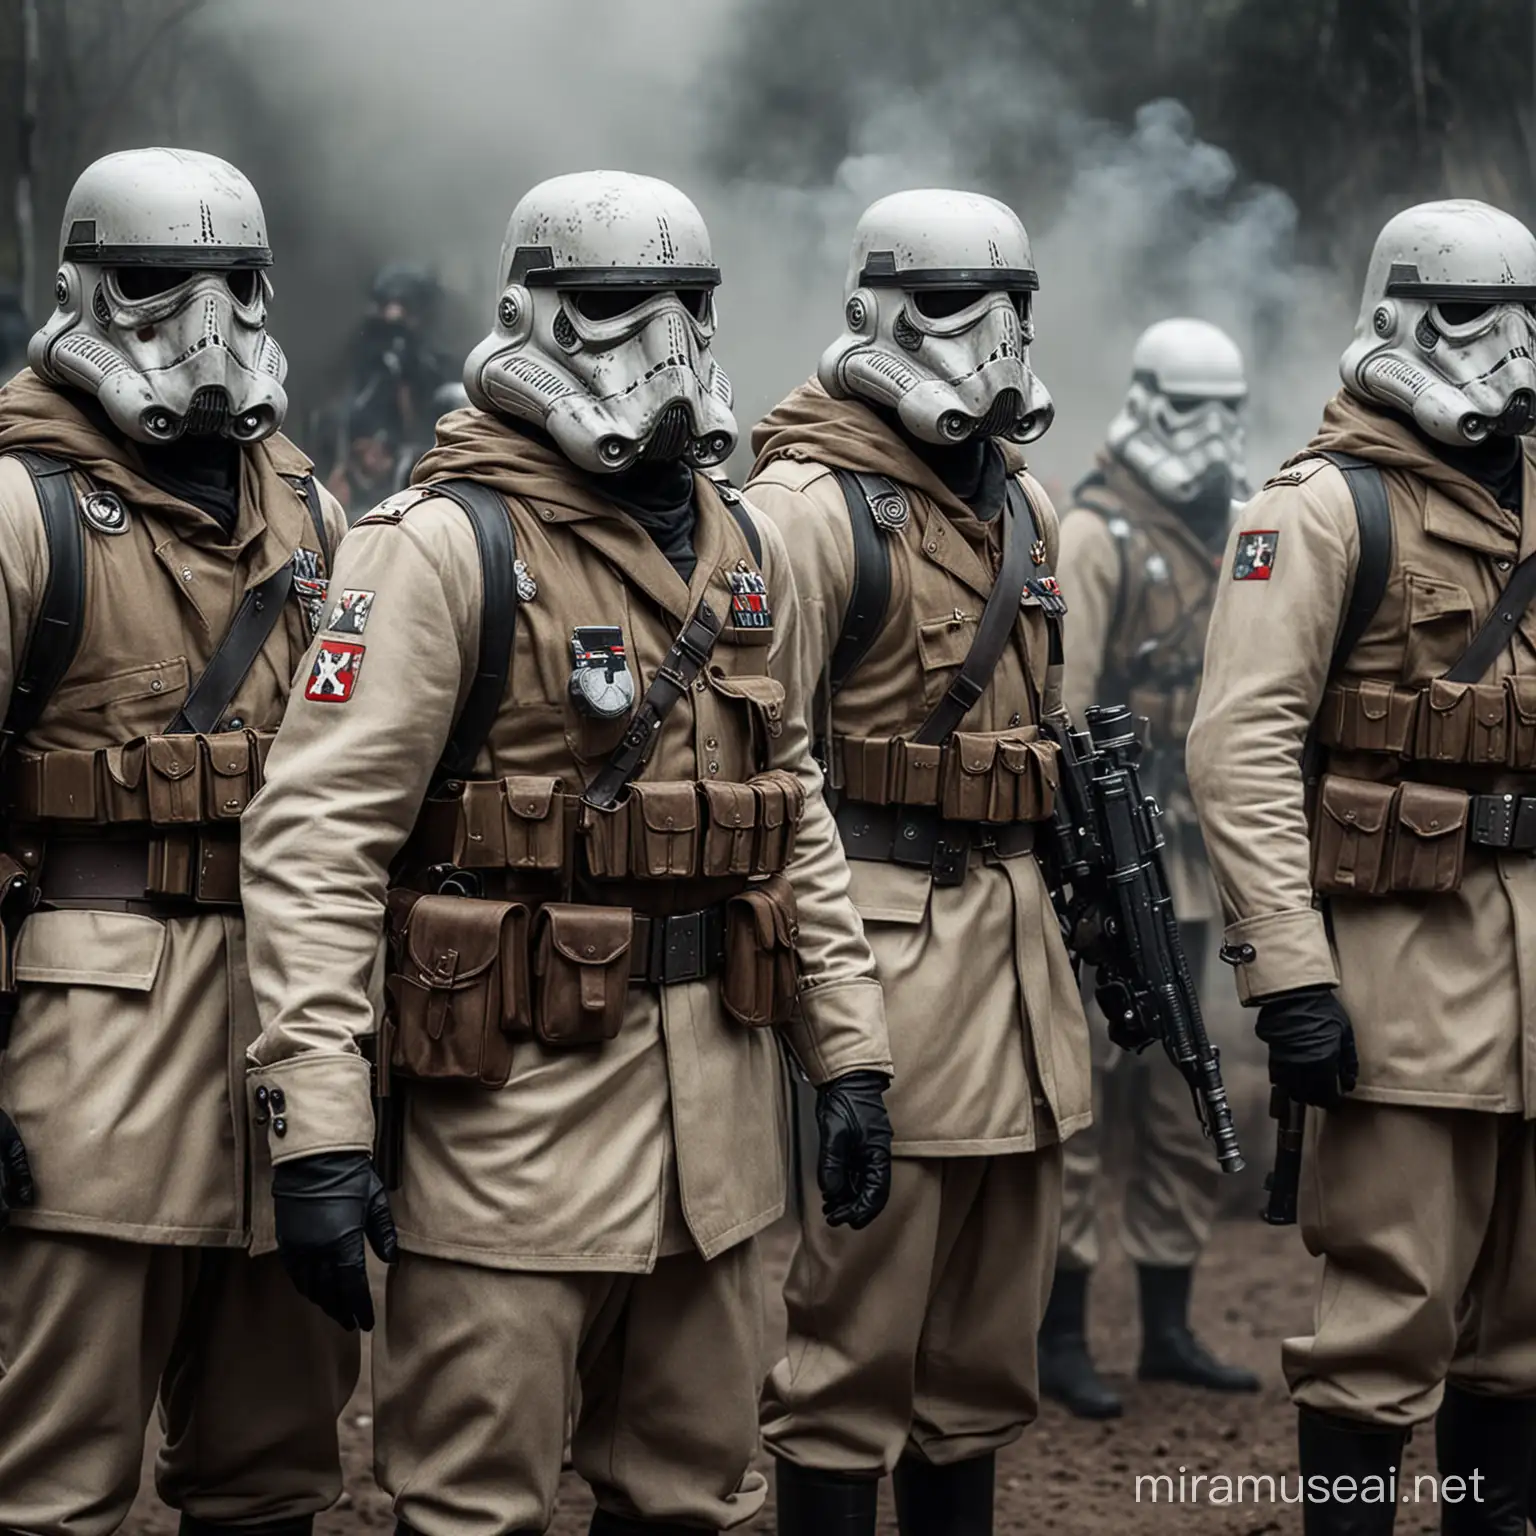 Advanced Nazi Soldiers in Gas Masks and Stormtrooper Coats